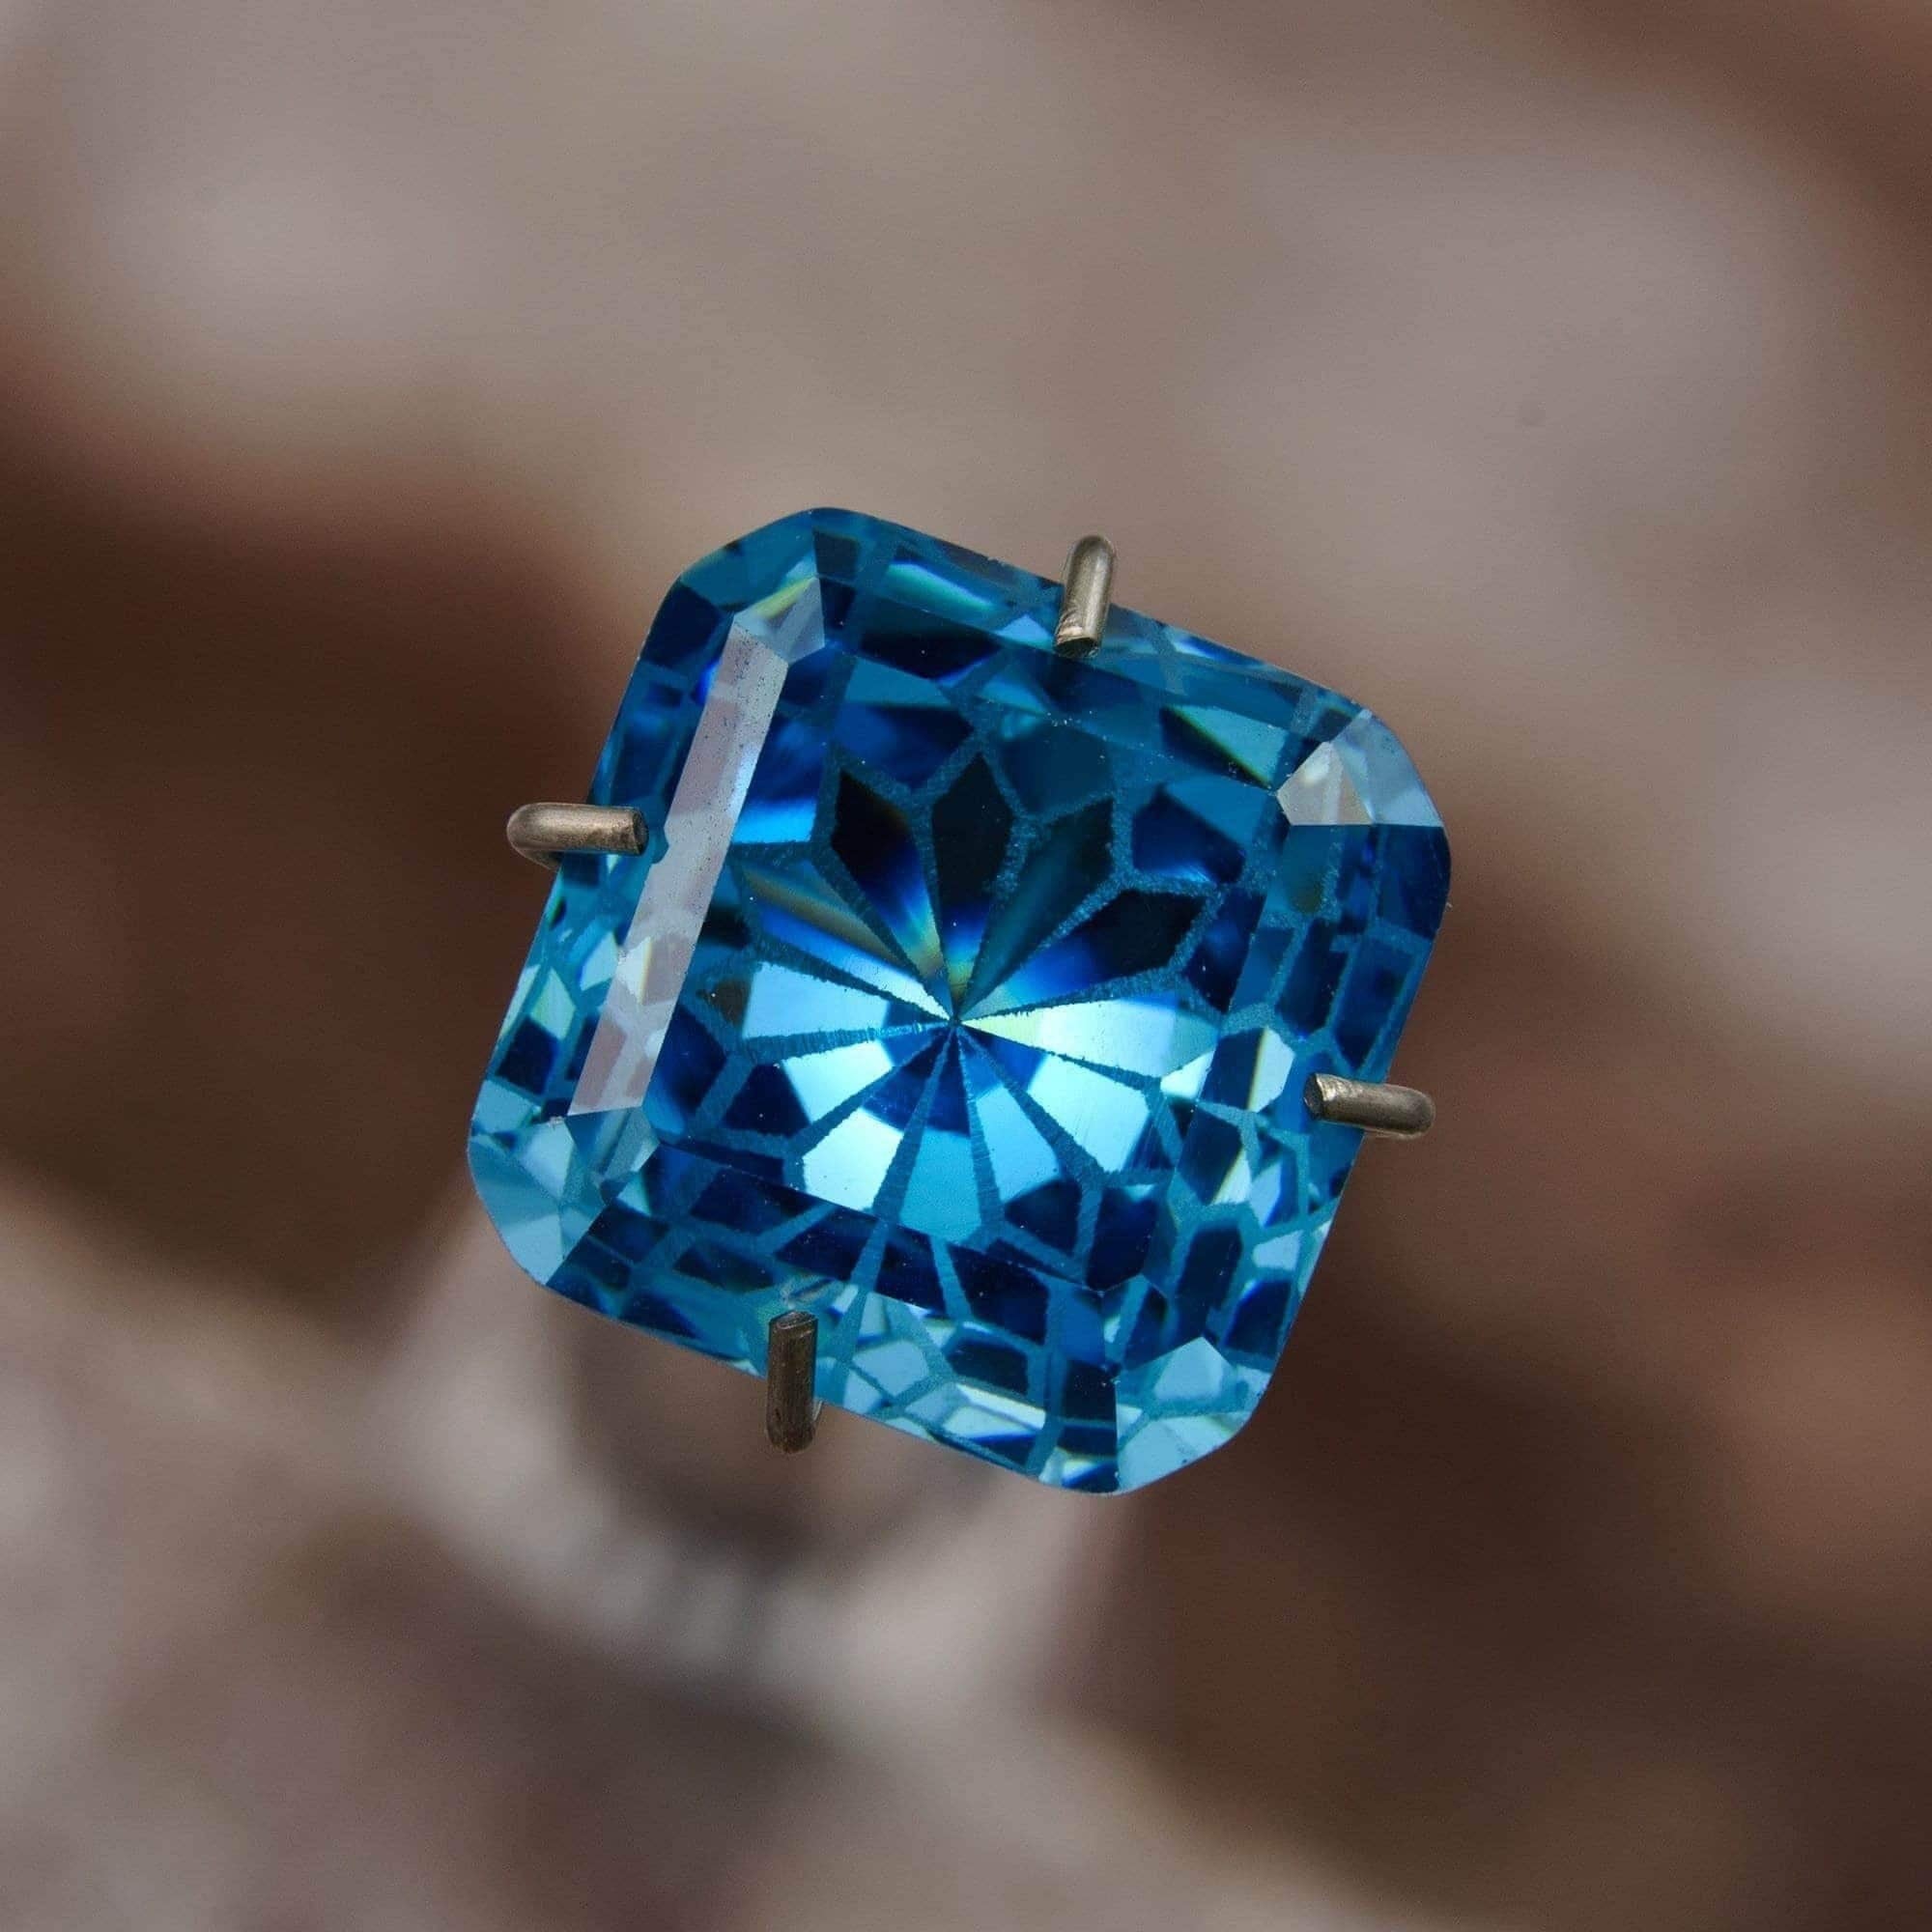 Cubic Zirconia 8mm Asscher Fantasy Square Cut in Blue – Add a Touch of Elegance to Your Creations